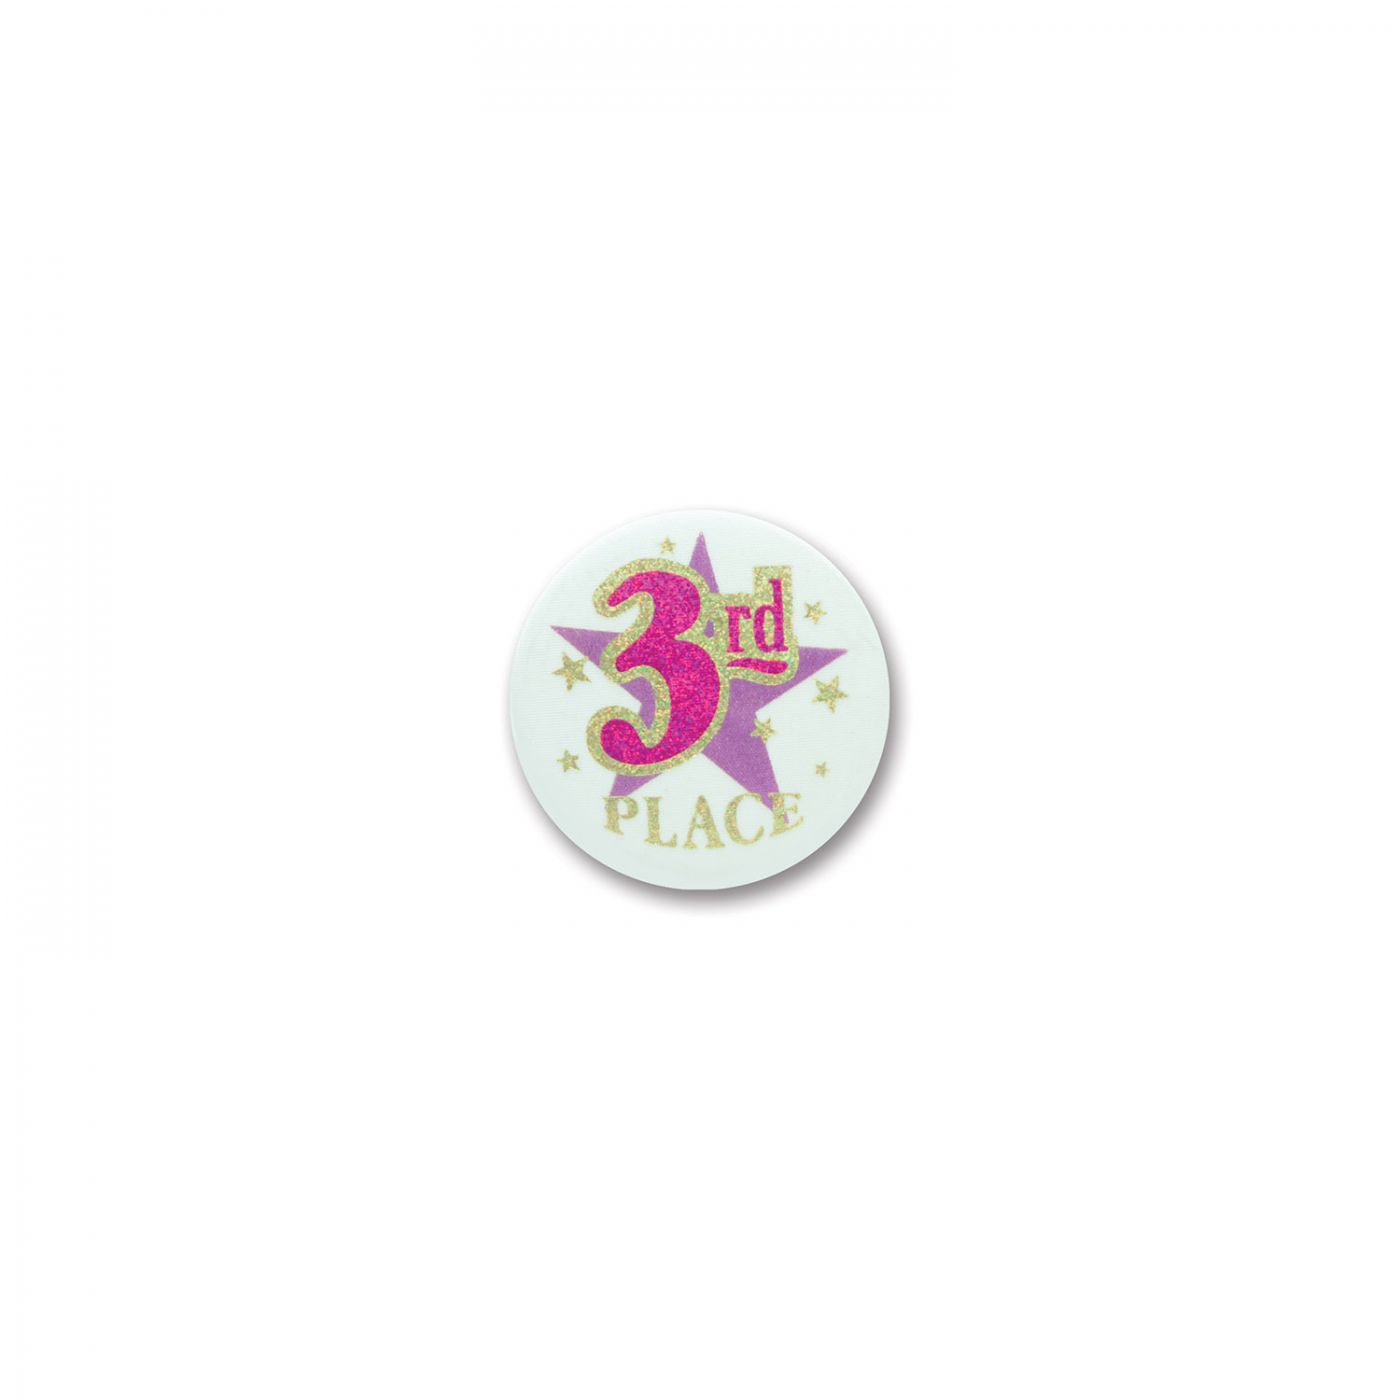 Image of 3rd Place Satin Button (6)